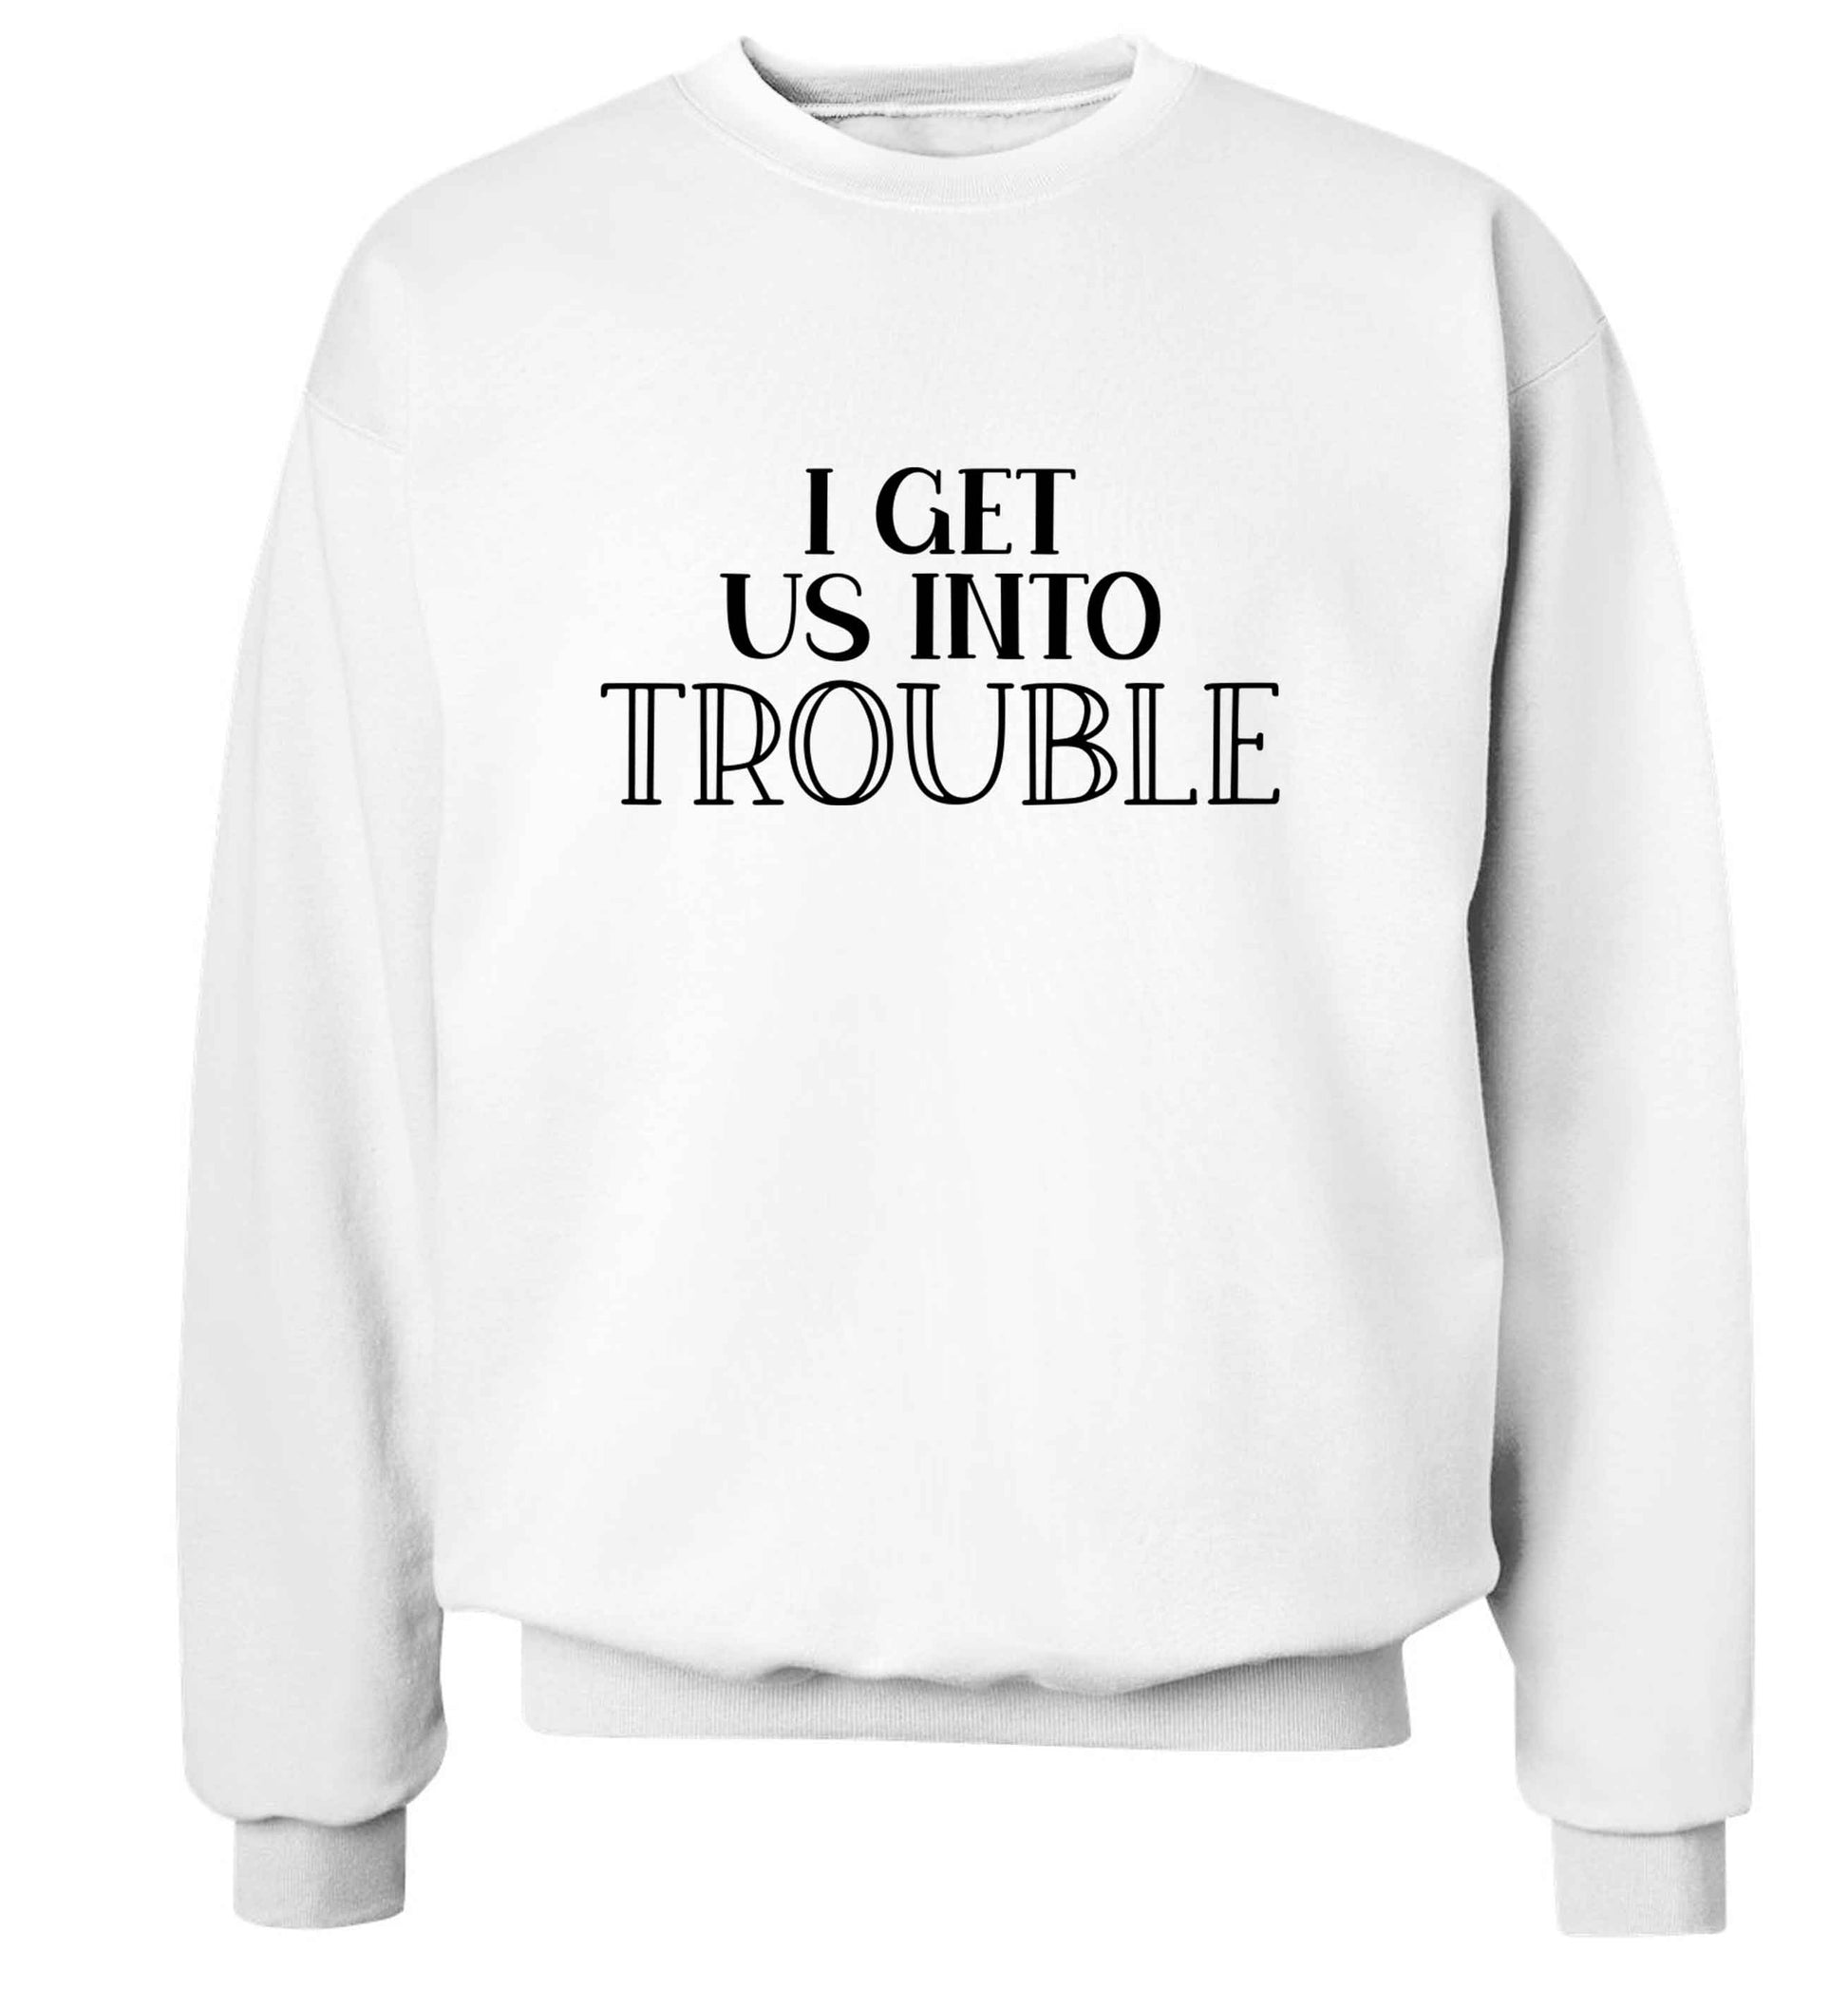 I get us into trouble adult's unisex white sweater 2XL